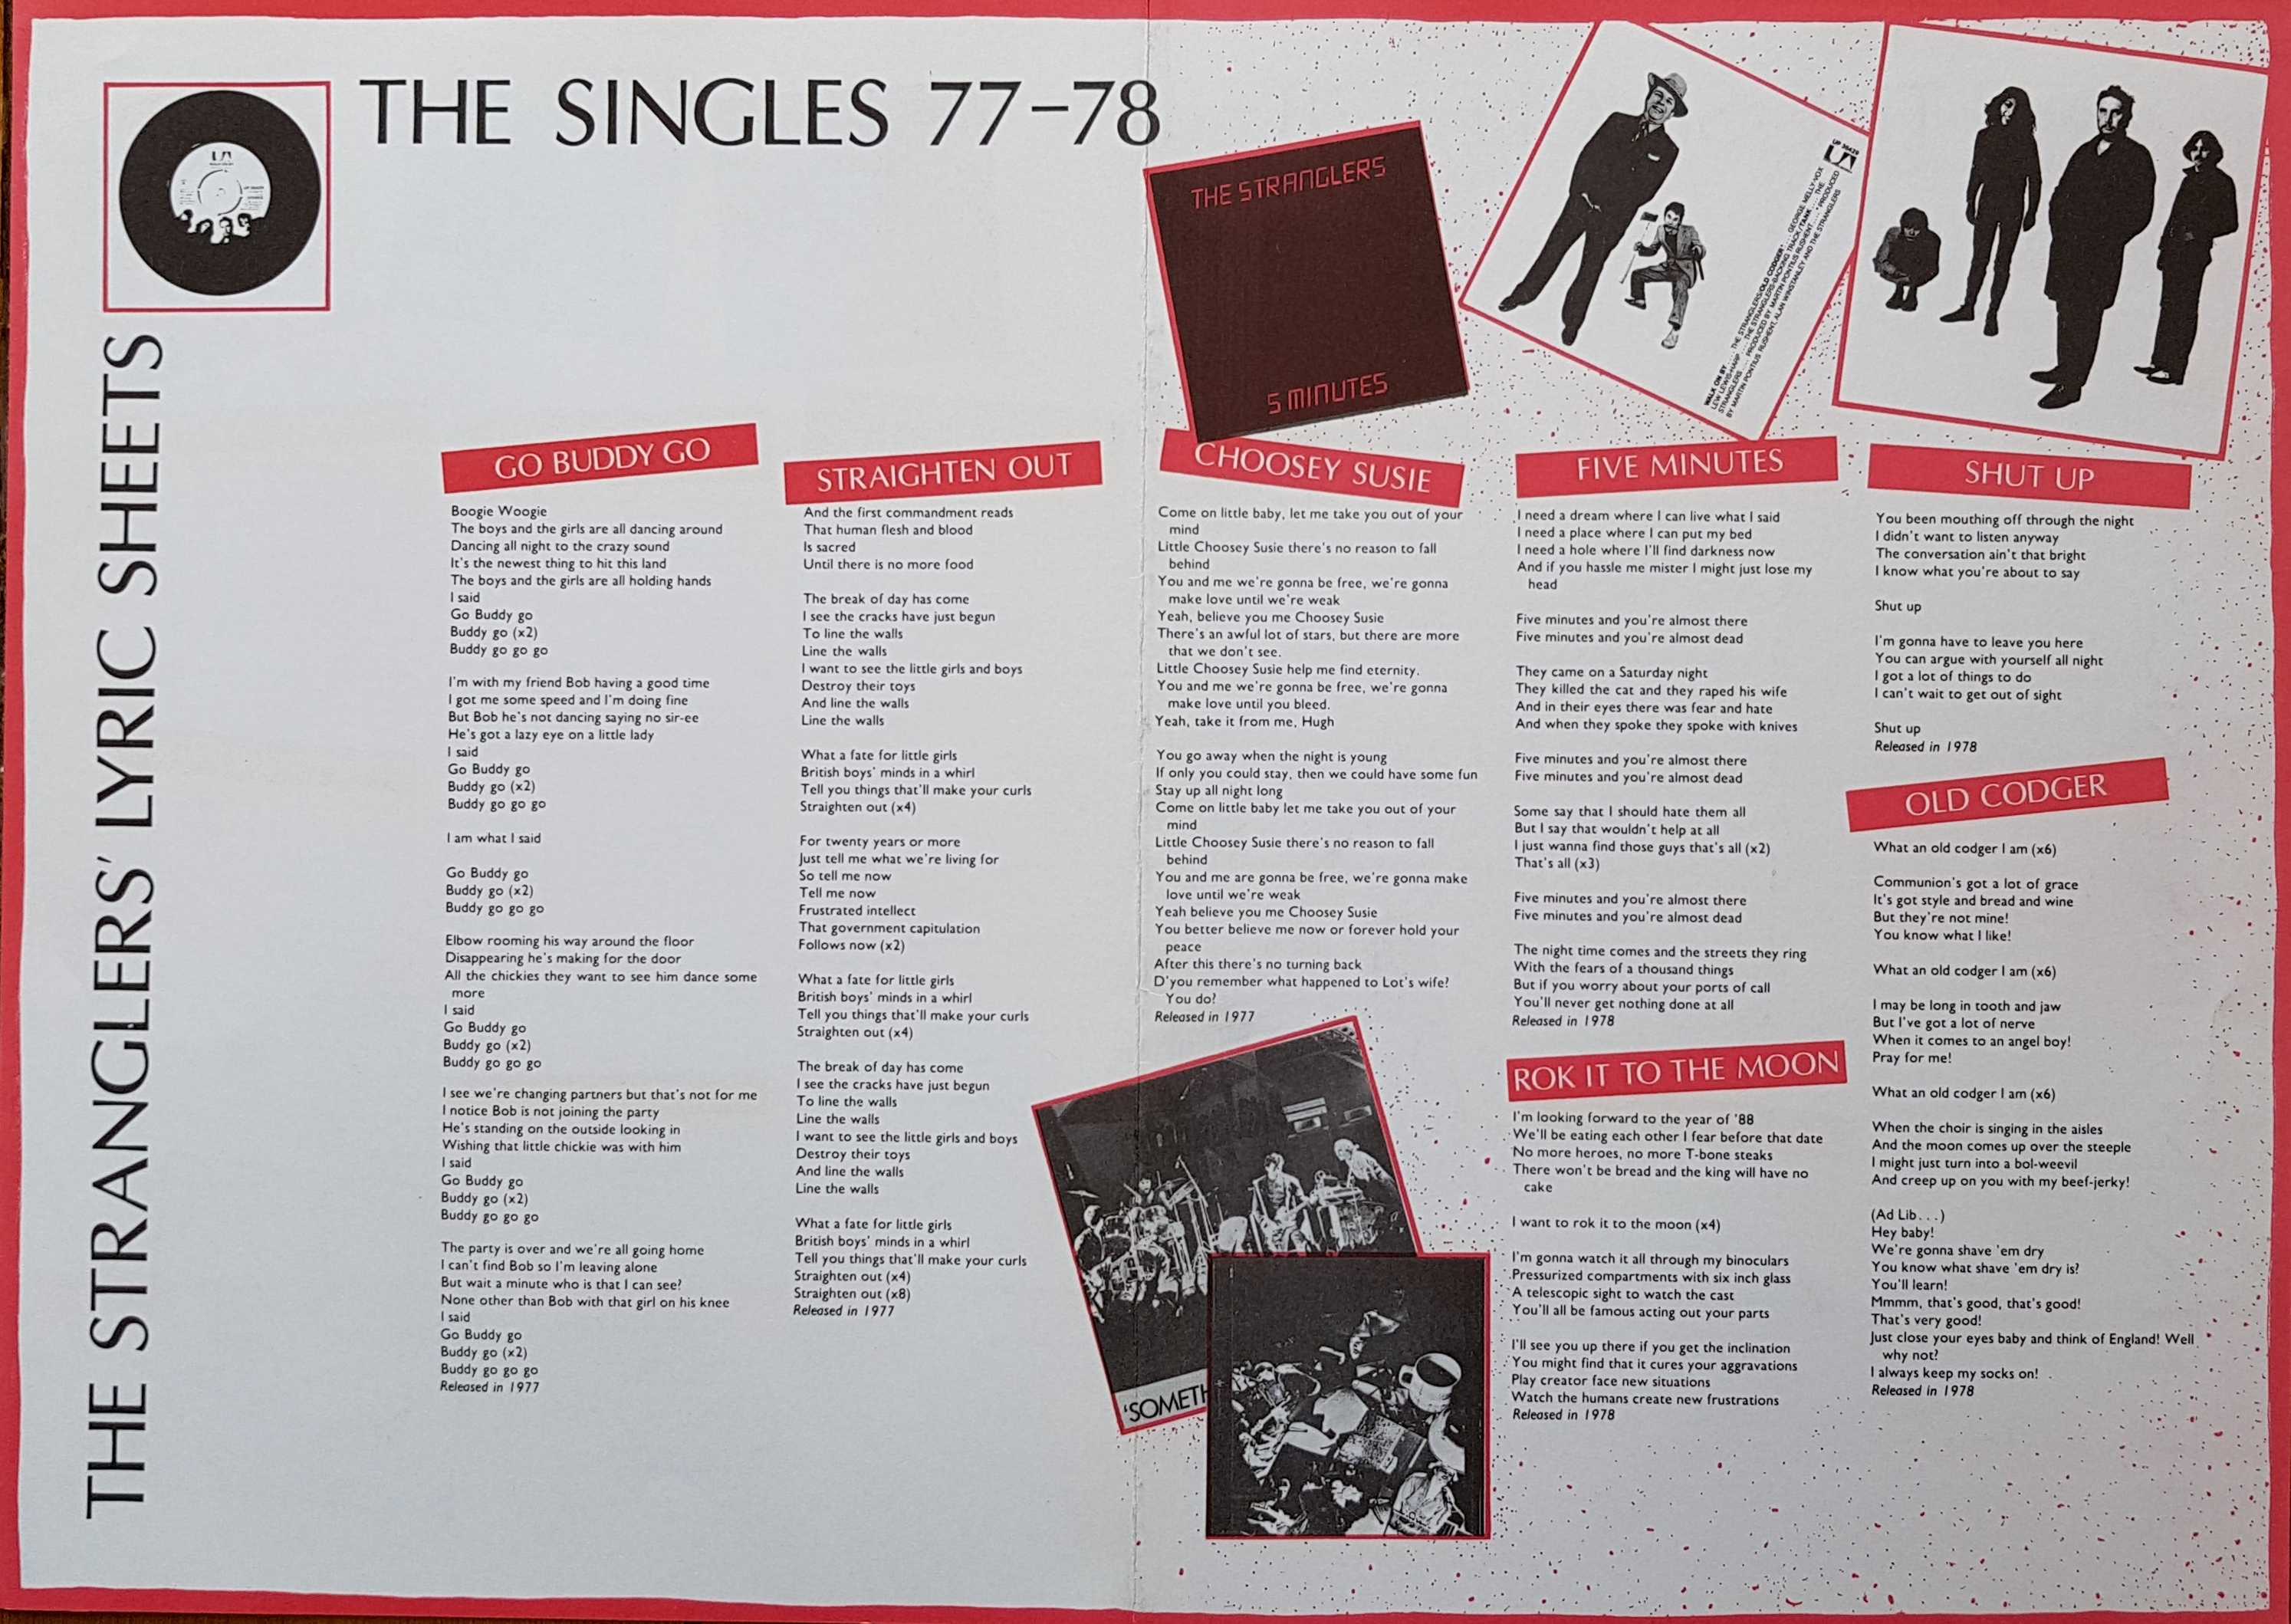 Picture of The singles 77-78 lyric sheets by artist The Stranglers  from The Stranglers books